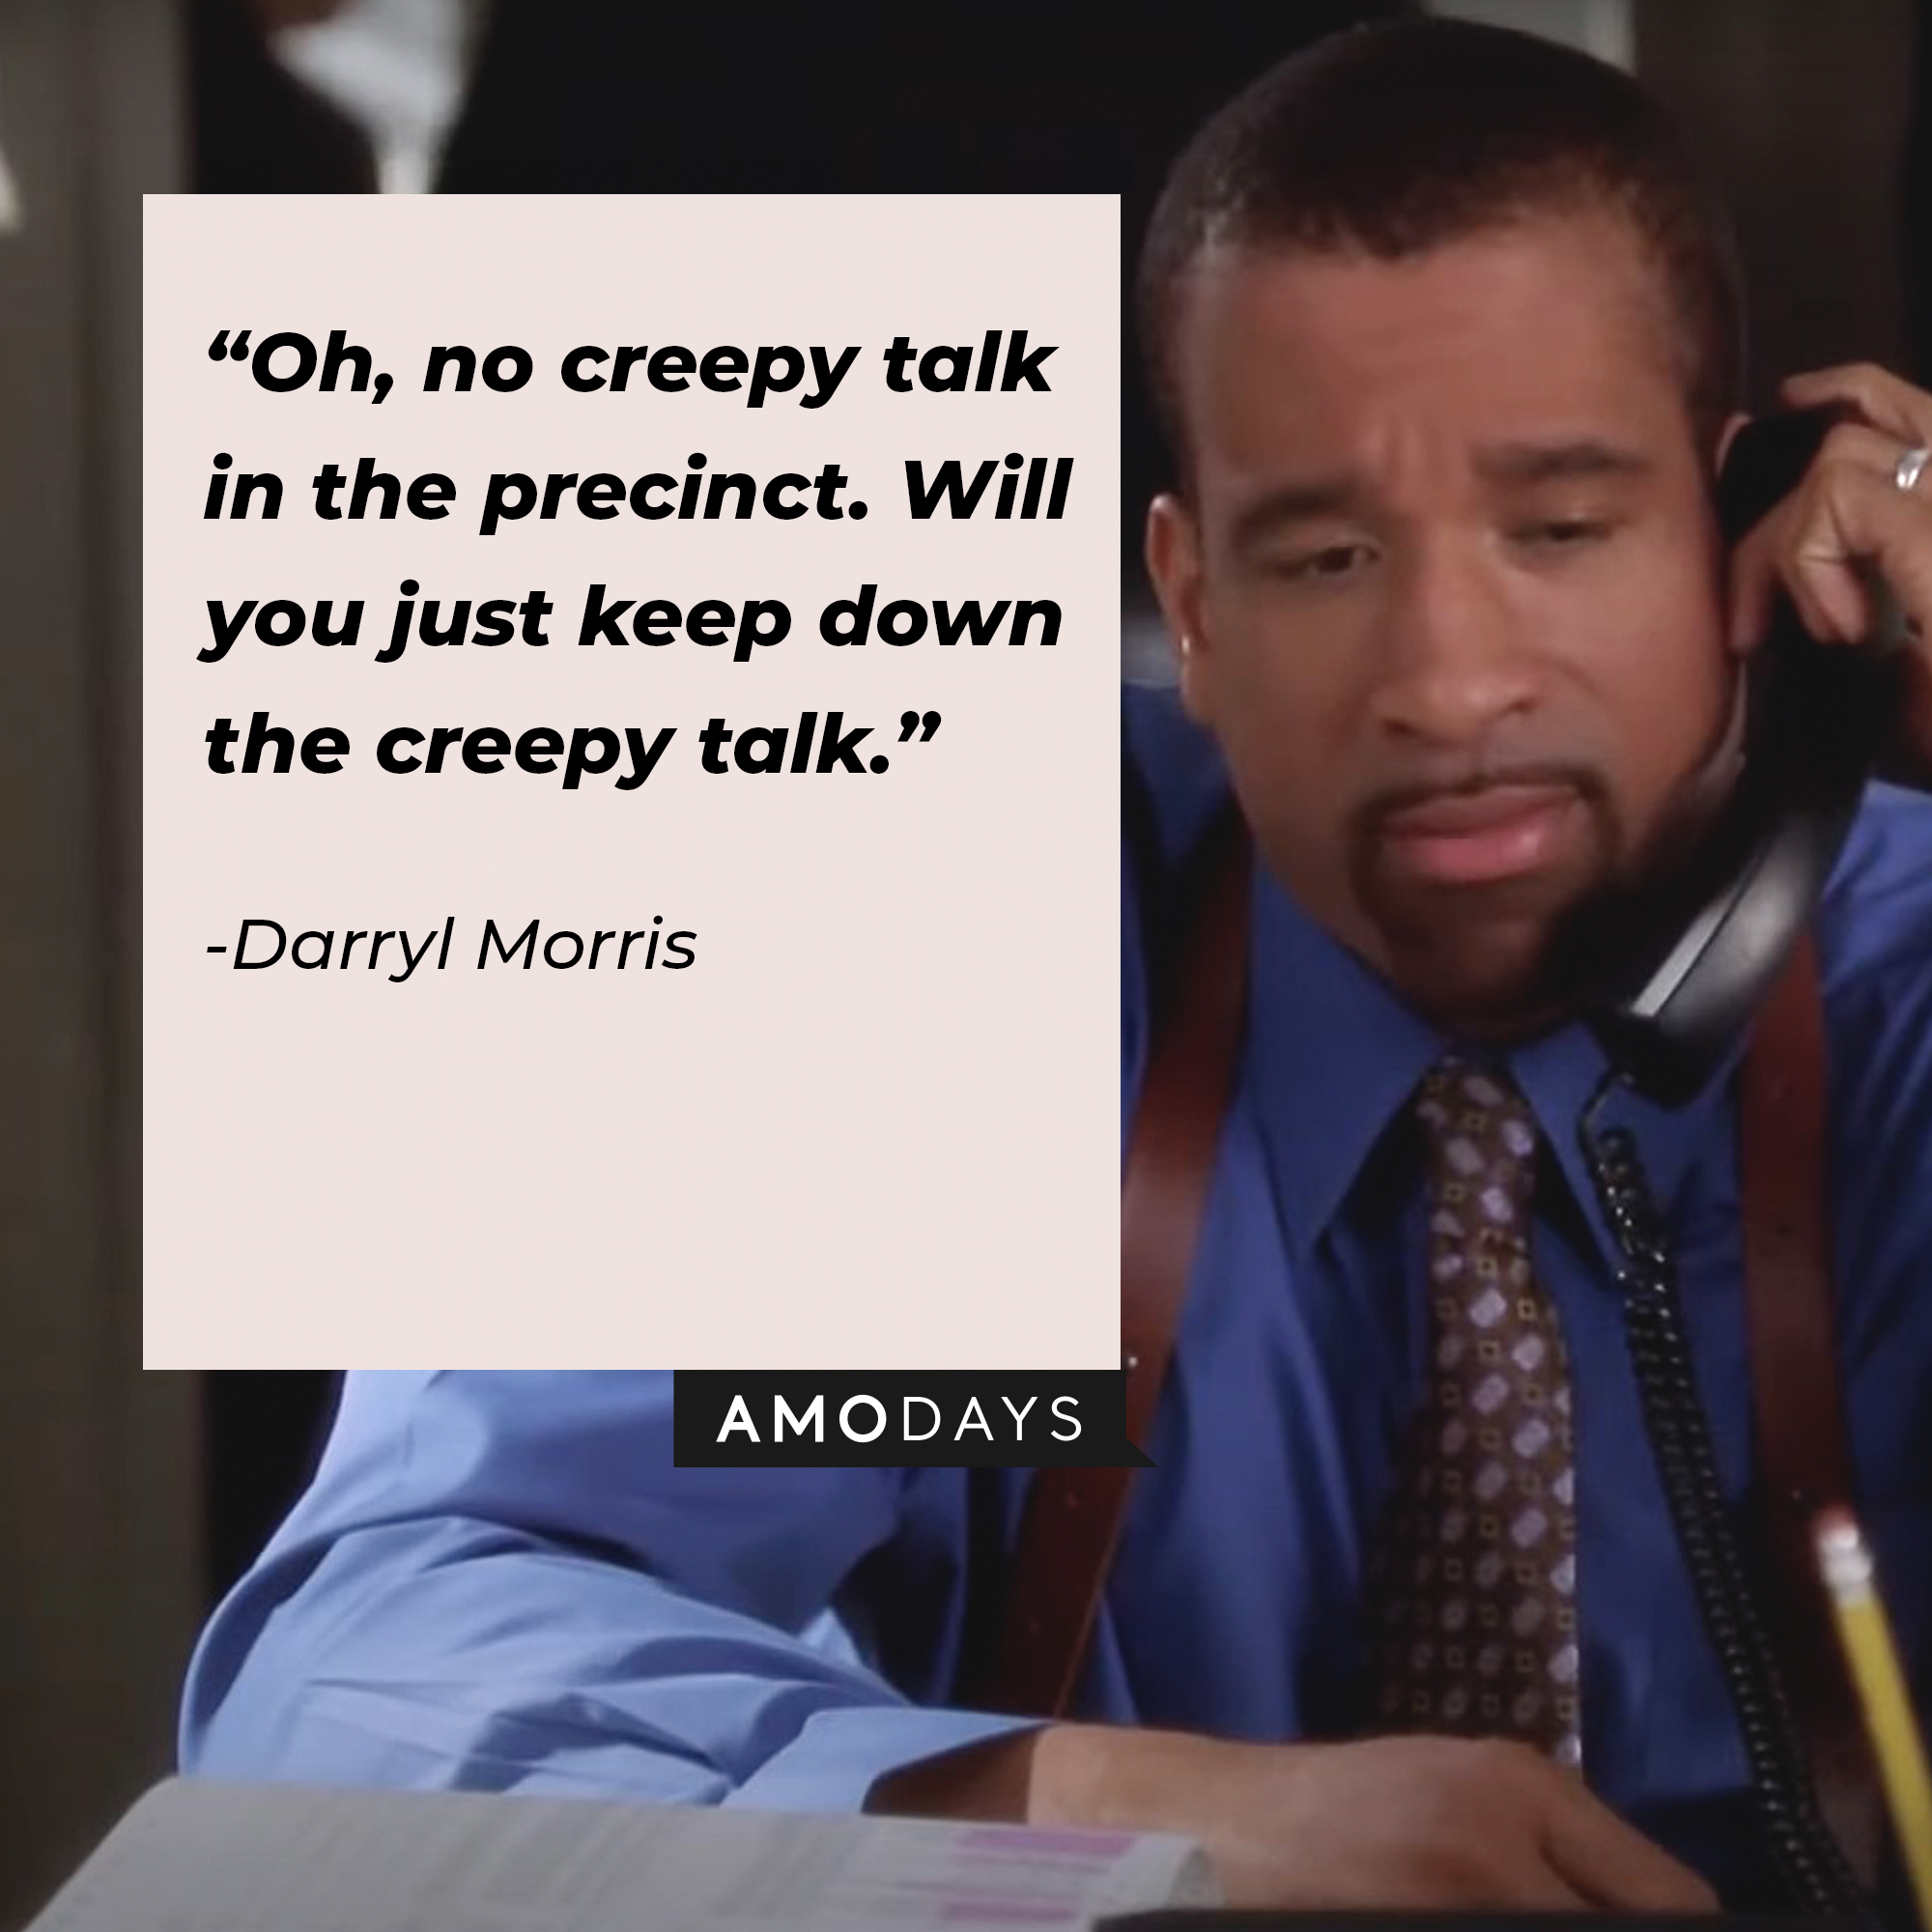 An image of Darryl Morris with his quote: “Oh, no creepy talk in the precinct. Will you just keep down the creepy talk.”  │Source: facebook.com/charmedtv